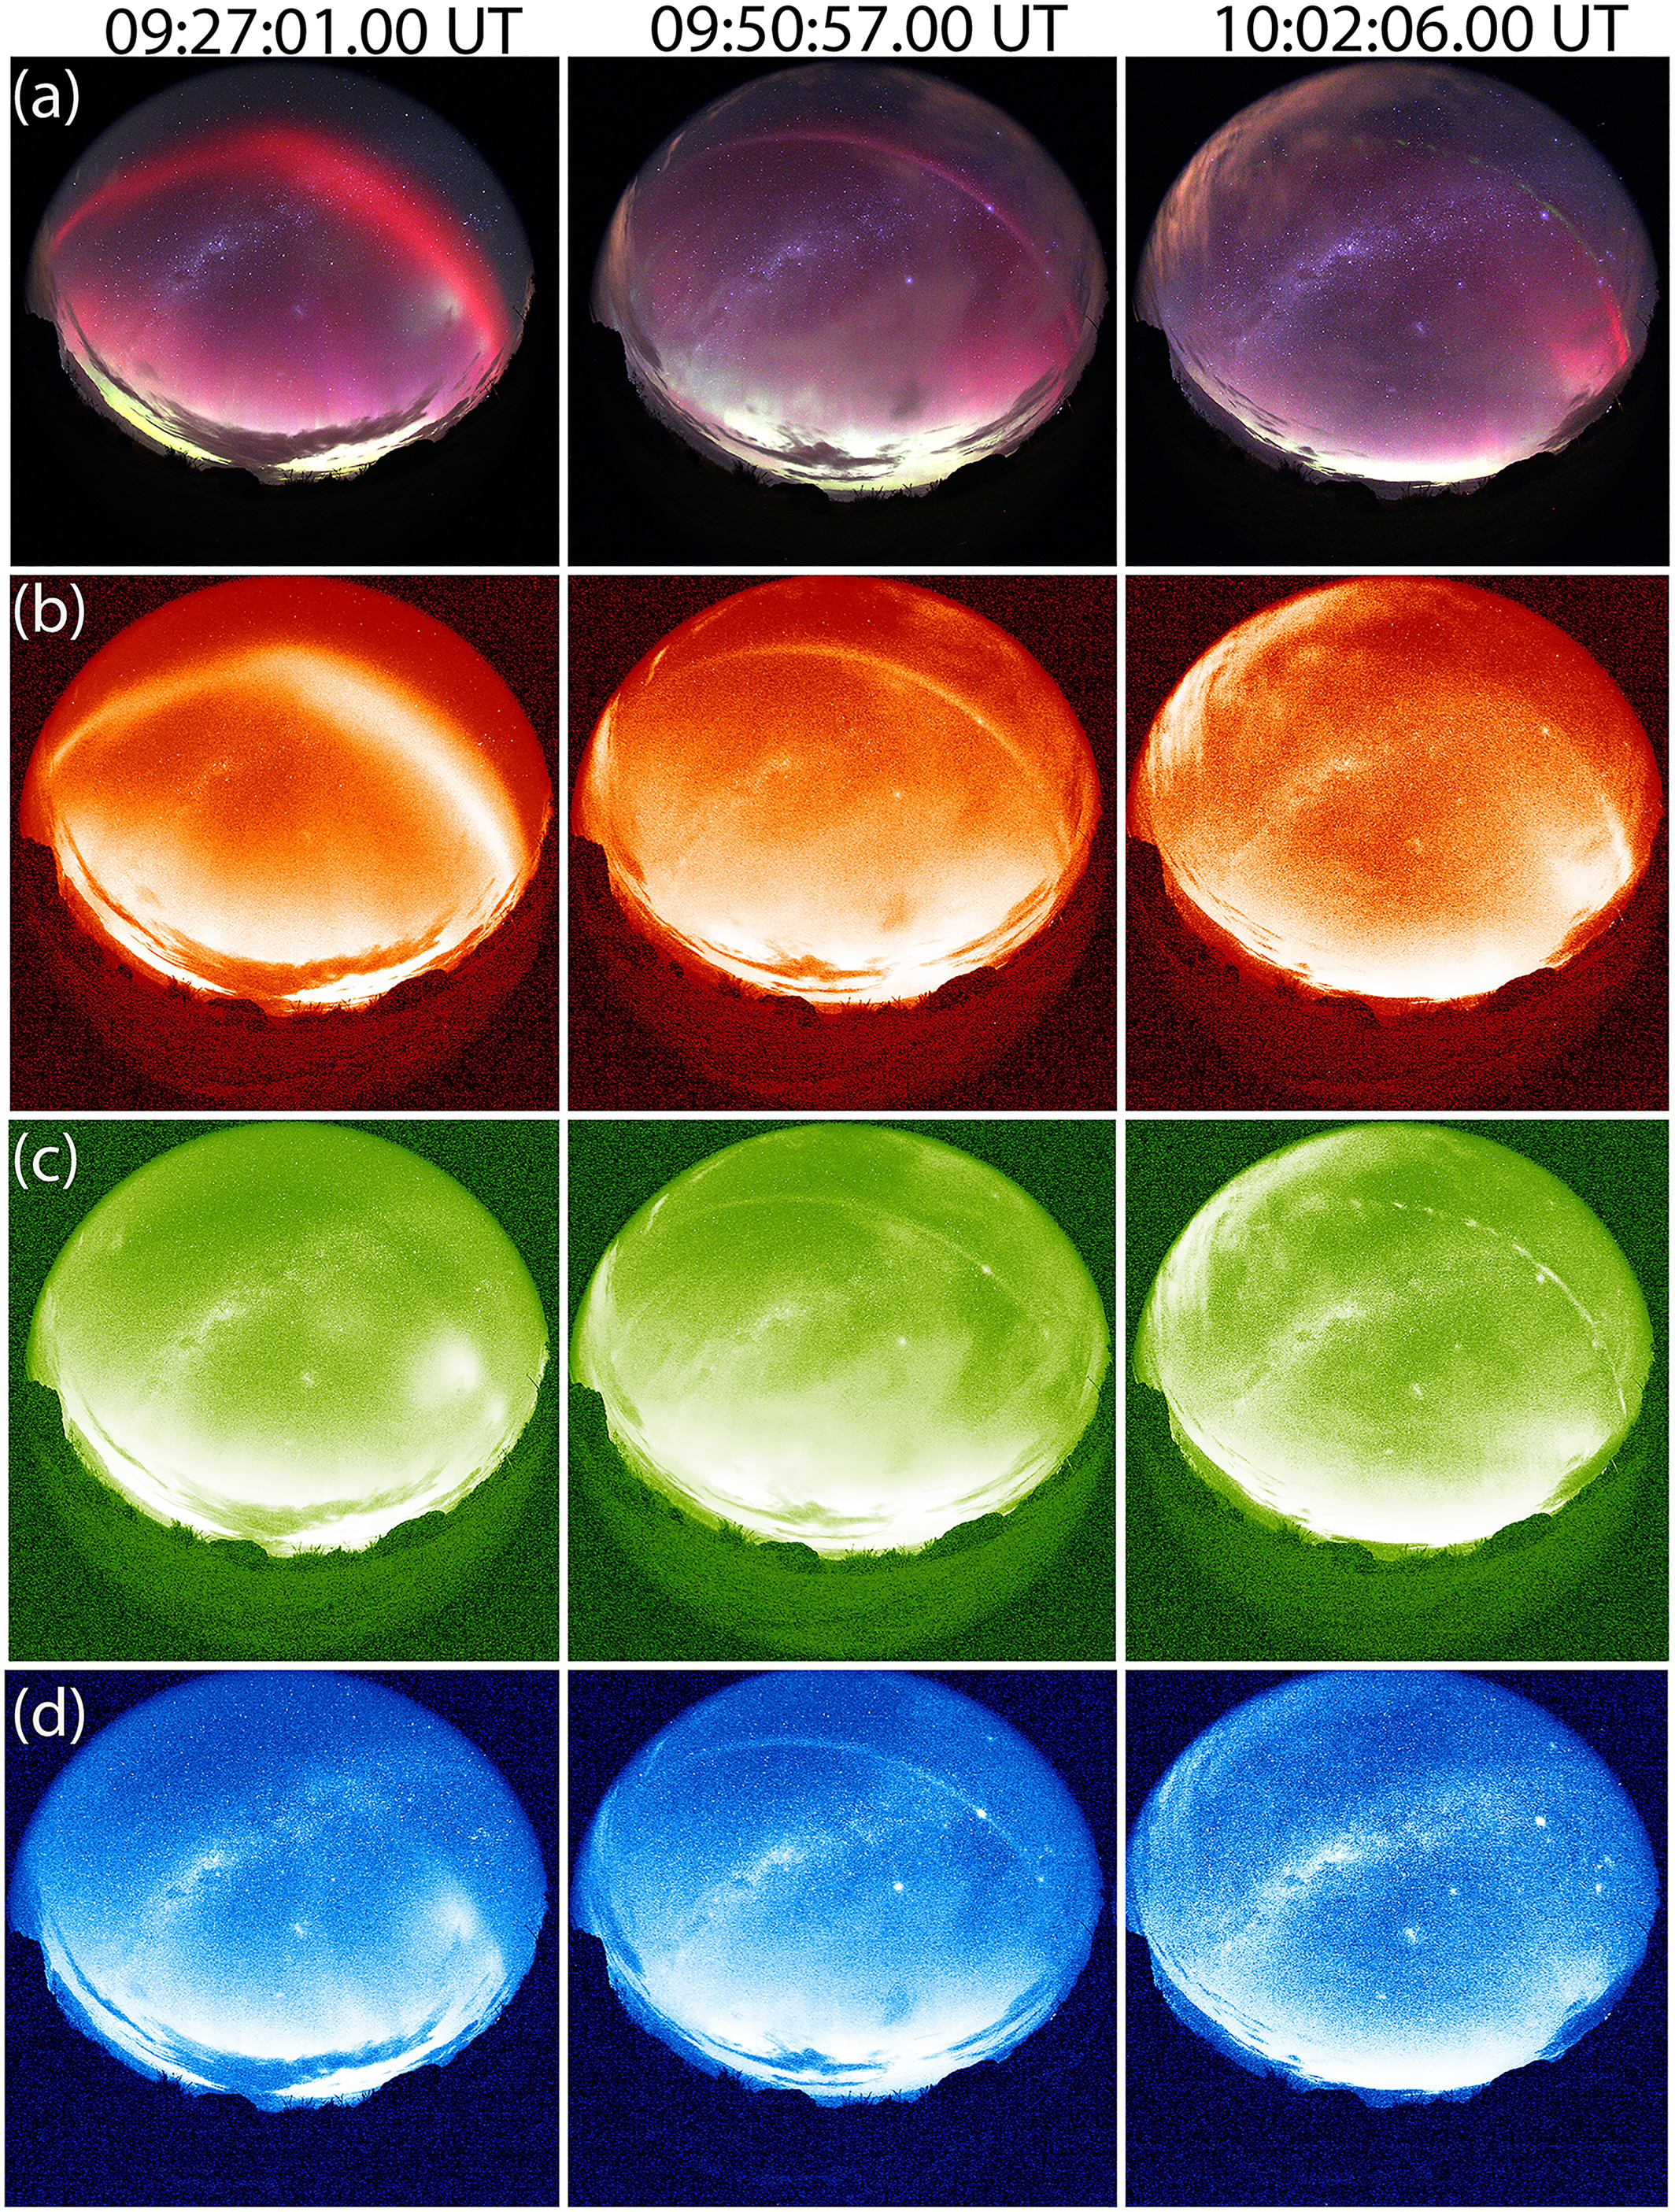 A complete set of auroral images showing auroral objects through a series of color filters.